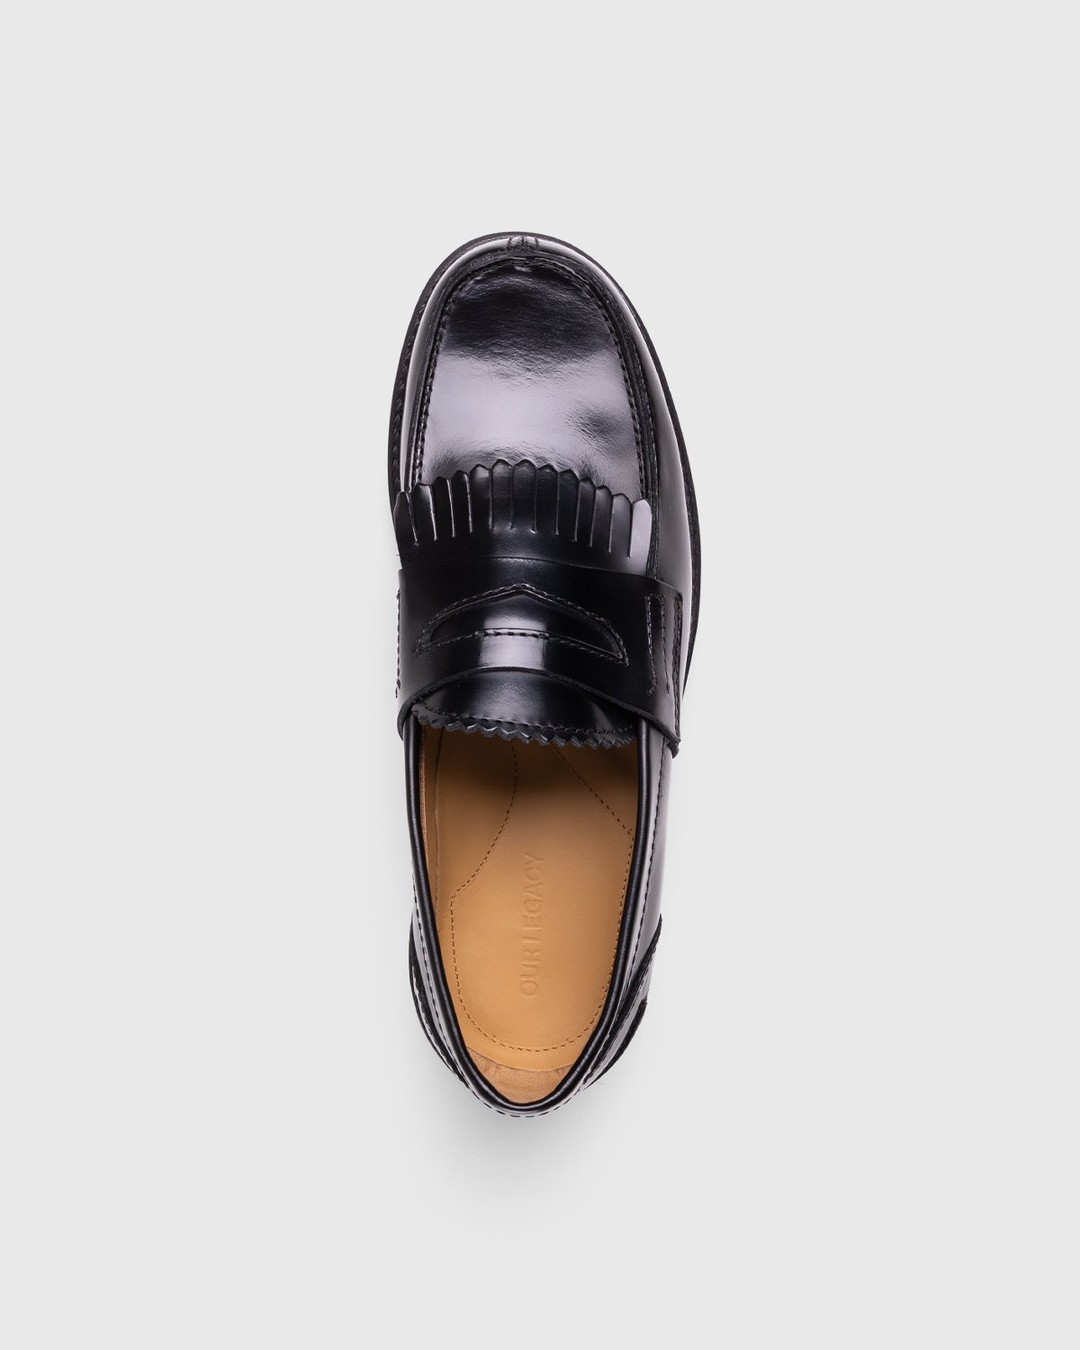 Our Legacy – Penny Loafer Black Leather - Loafers - Black - Image 6